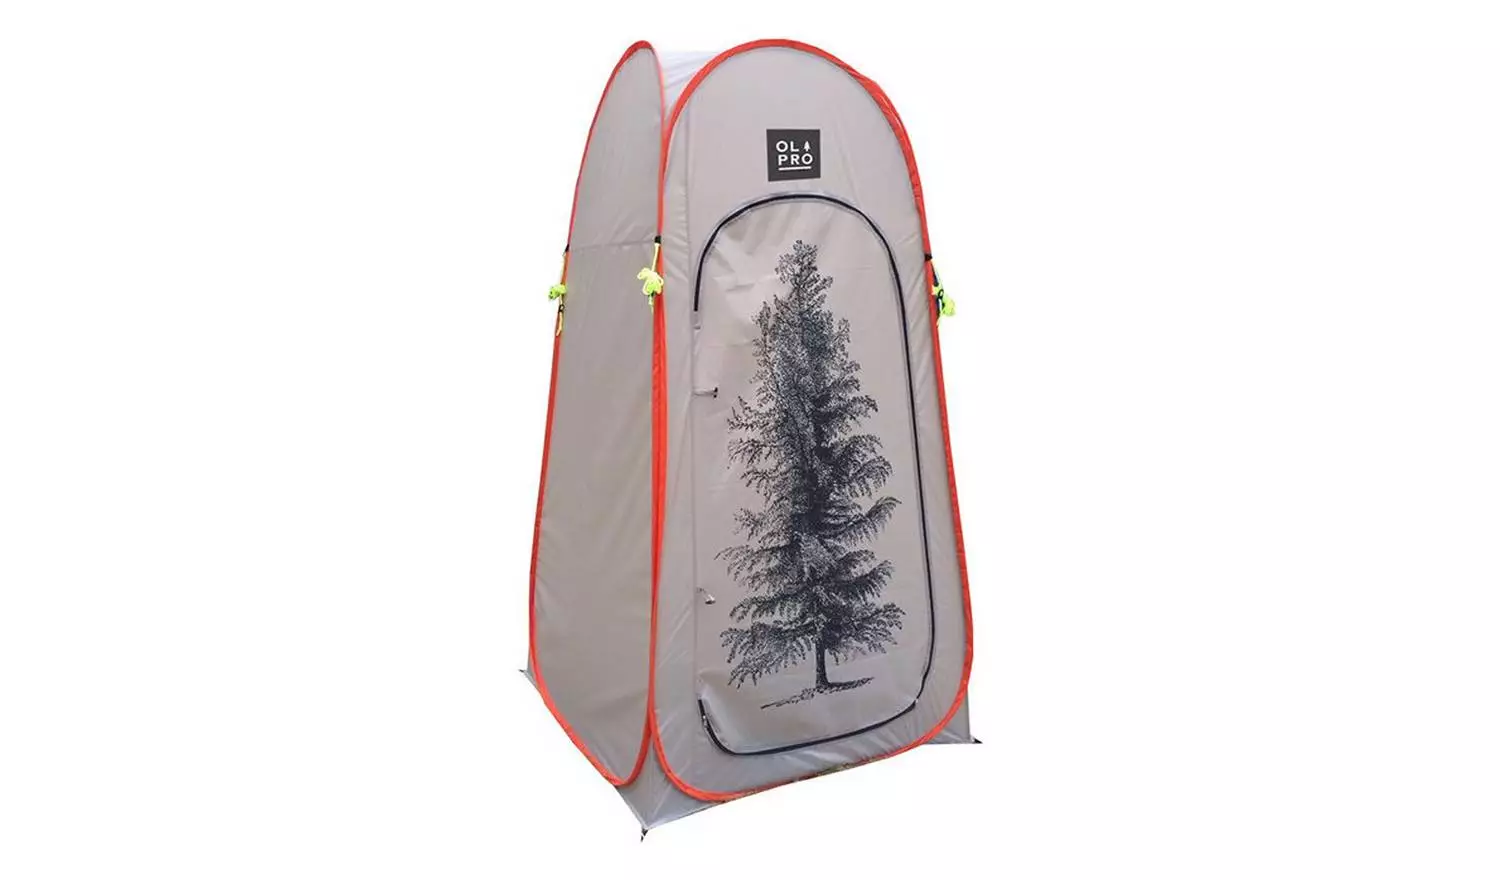 Olpro Pop-Up Toilet Tent with tree print, £49.99.